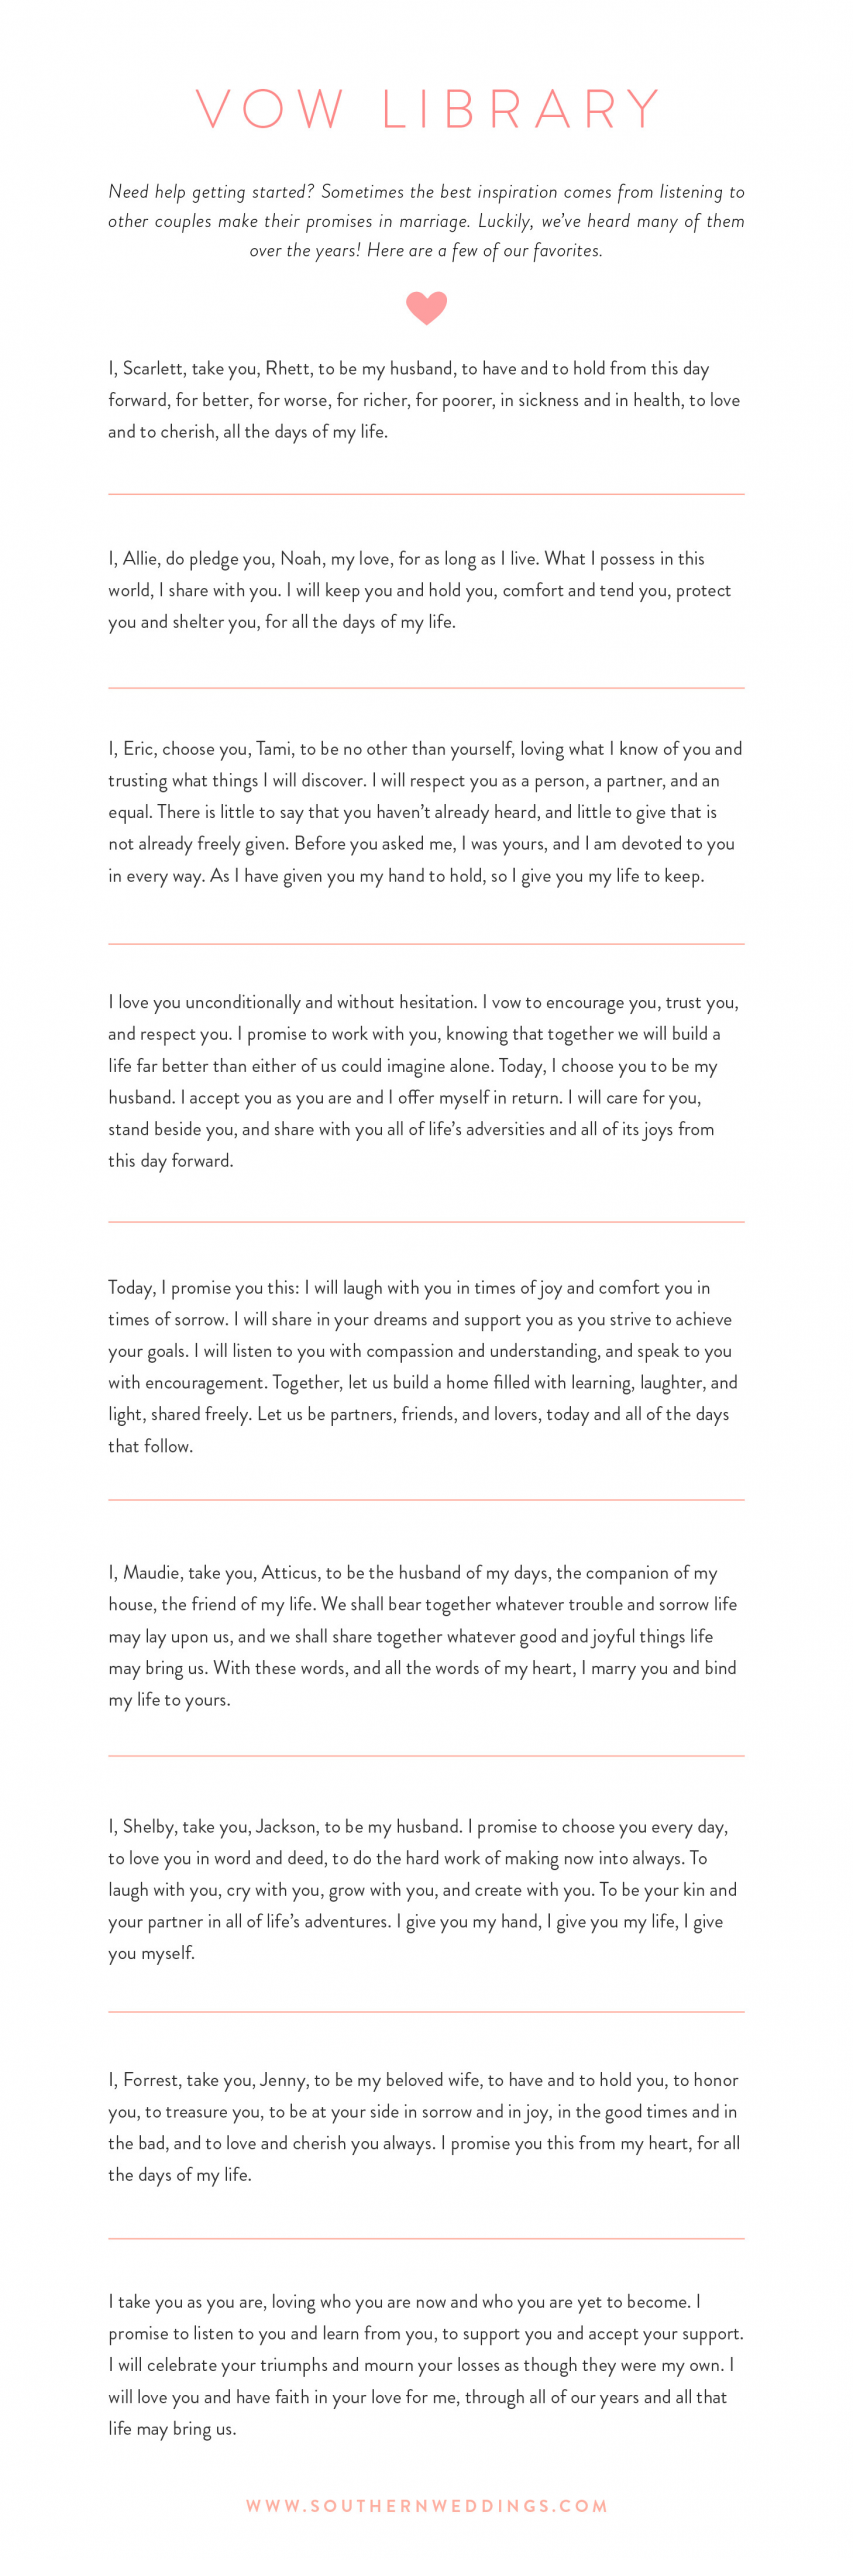 Examples Of Personal Wedding Vows
 9 Romantic Wedding Vows